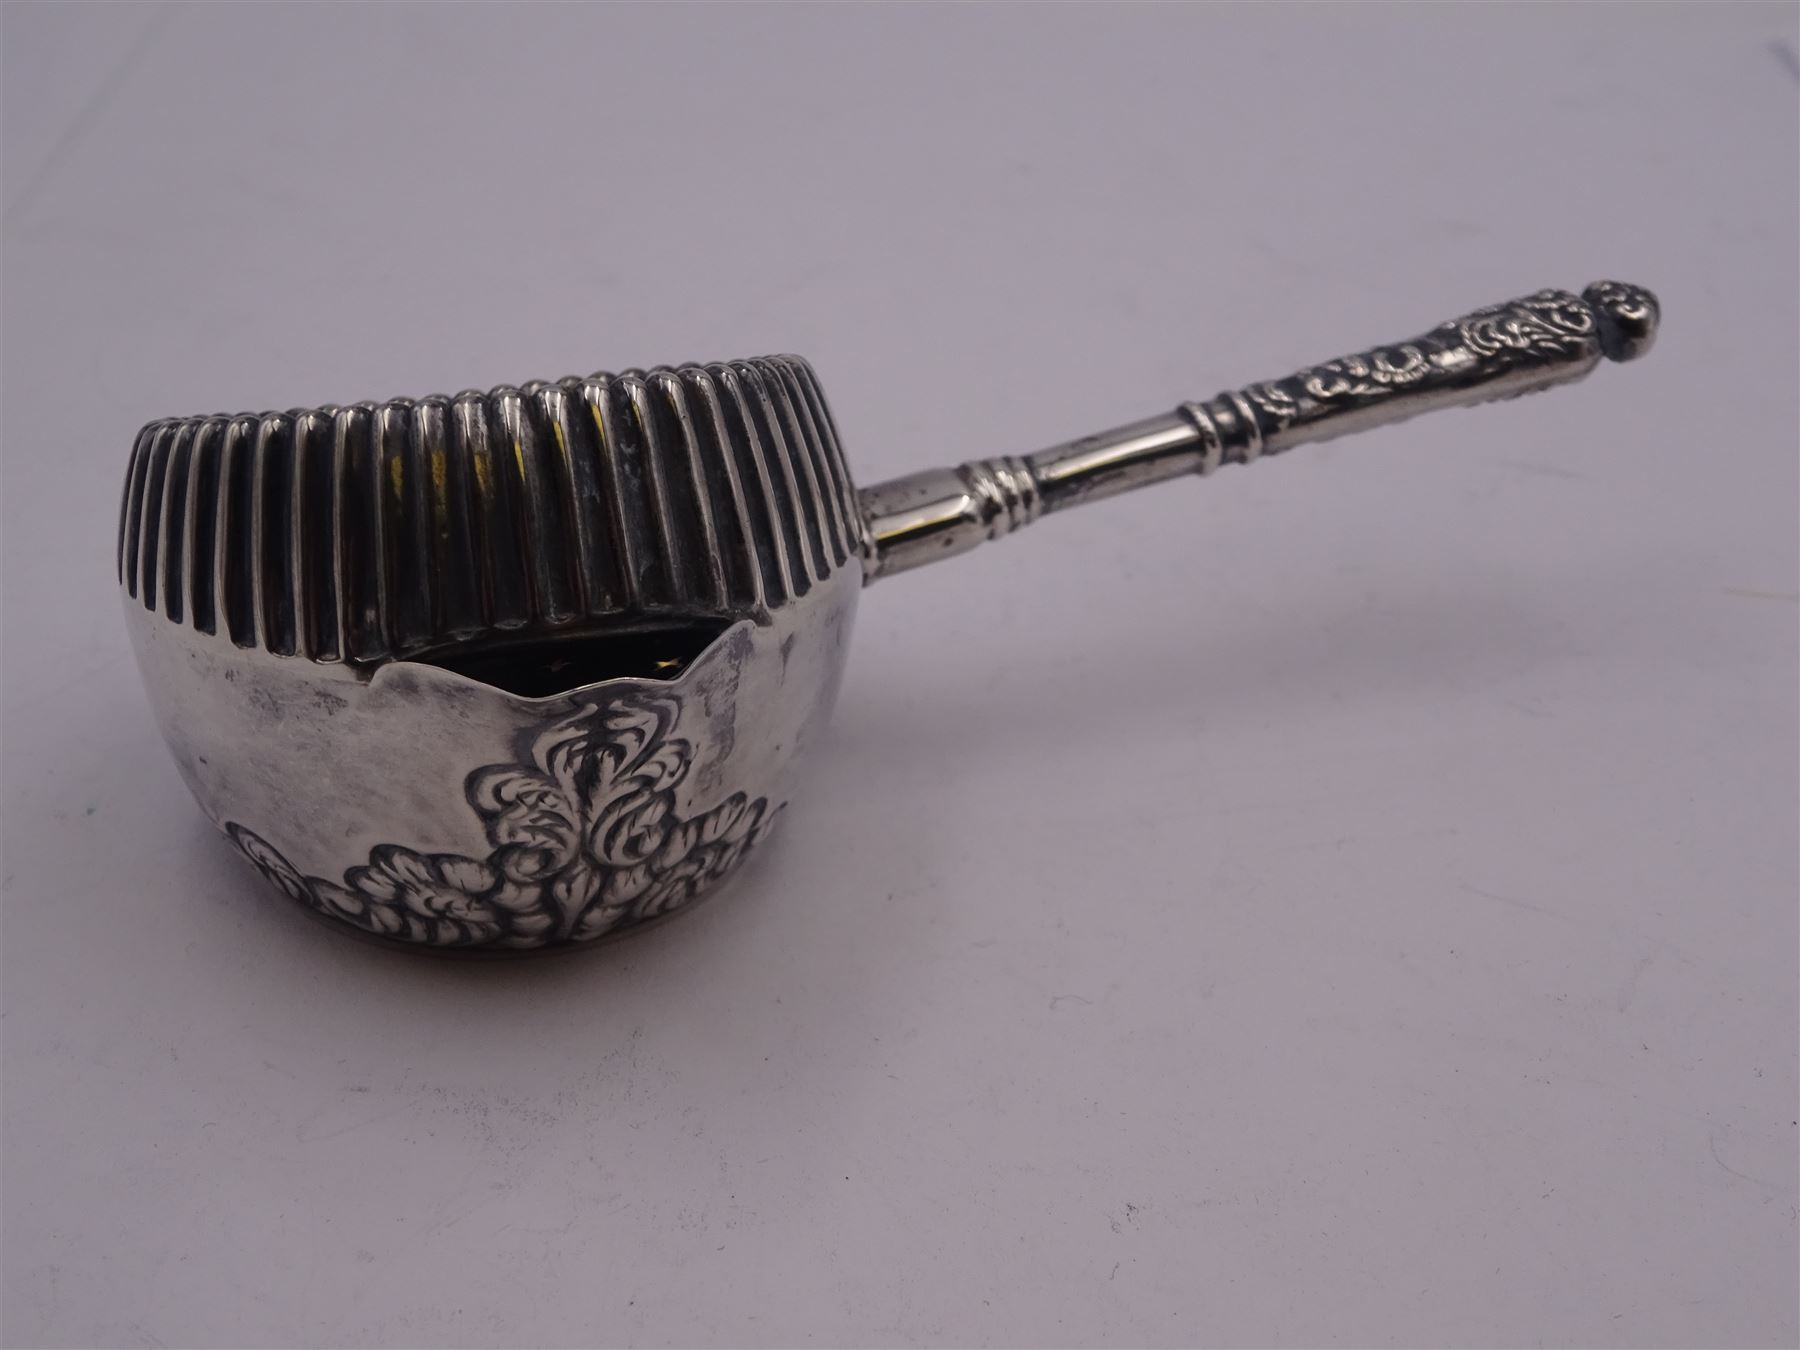 Late 19th century American silver strainer - Image 3 of 9